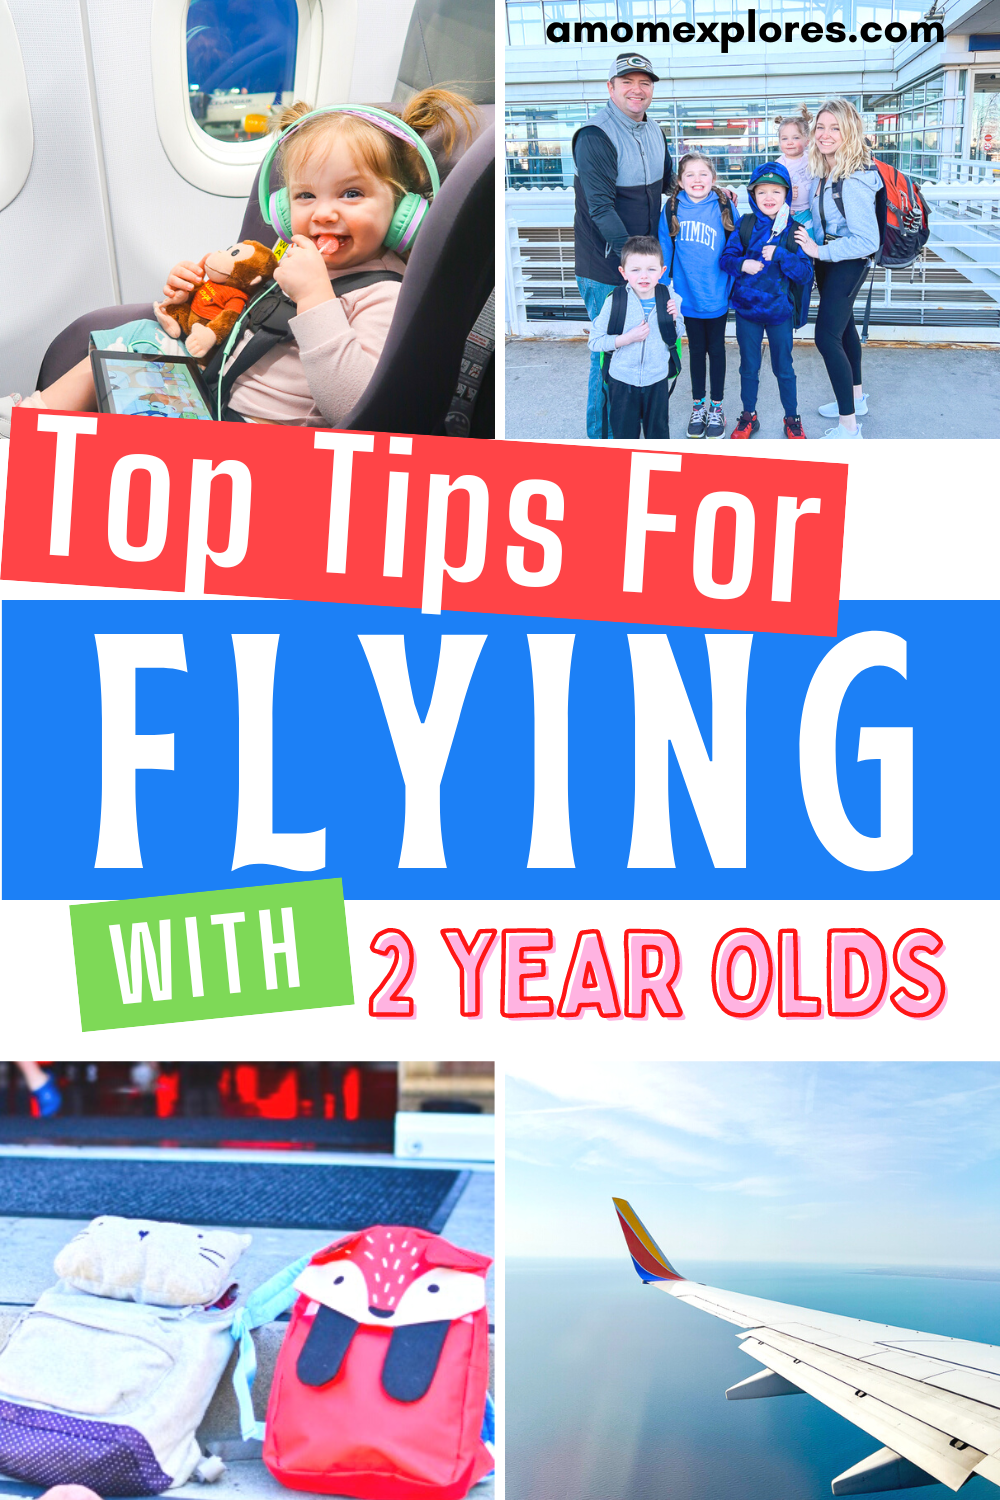 top tips for flying with a 2 year old toddler - A Mom Explores family travel blog gives tips for flying with toddlers and kids, how to travel with toddlers, and what to do to entertain a 2 year old in the airport and.png